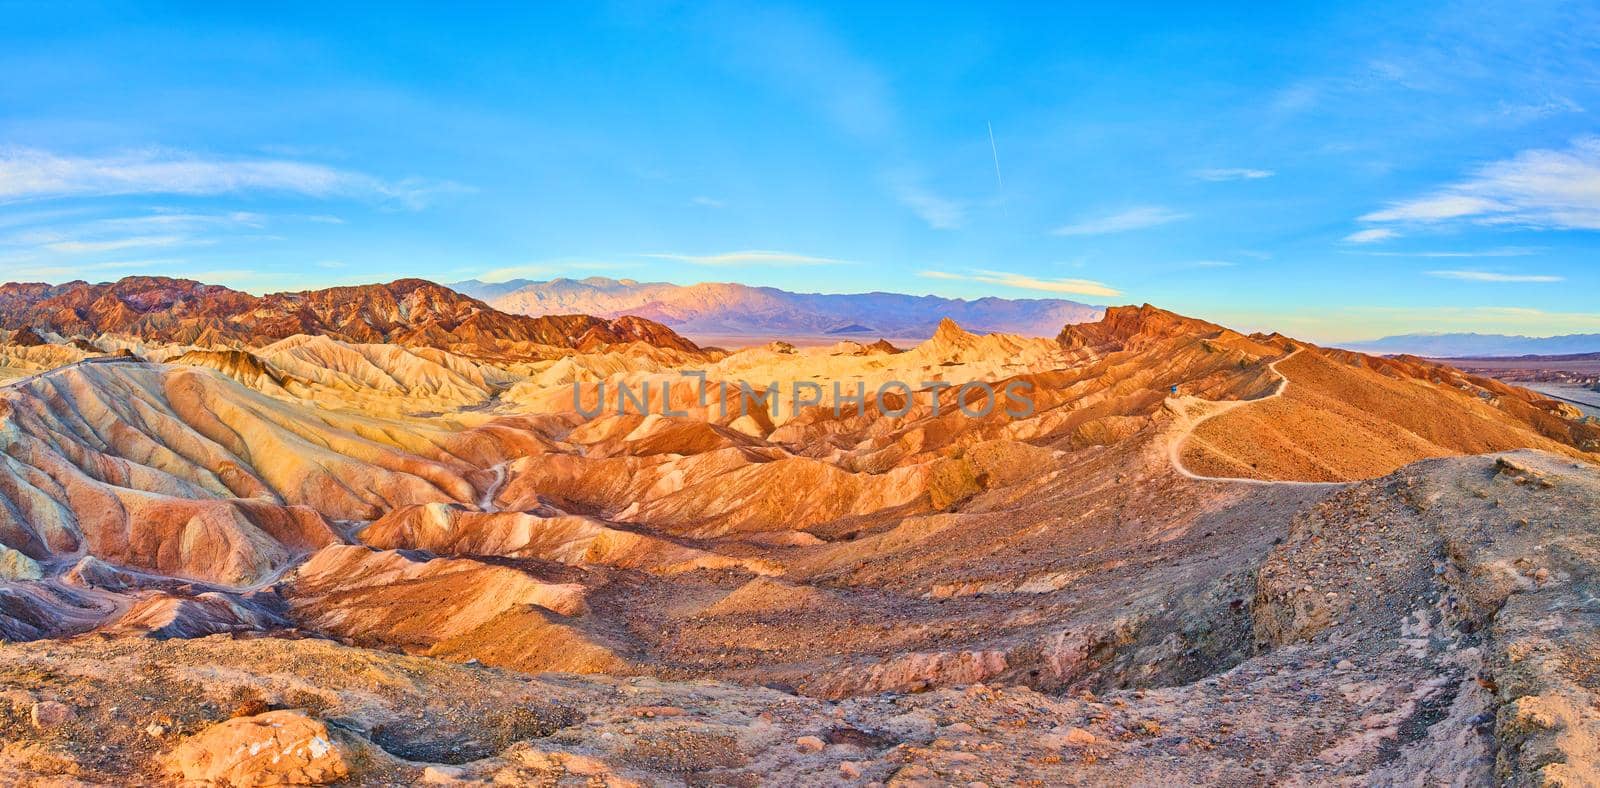 Image of Mountains featuring waves of sediment colors and hiking path through the peaks in Death Valley